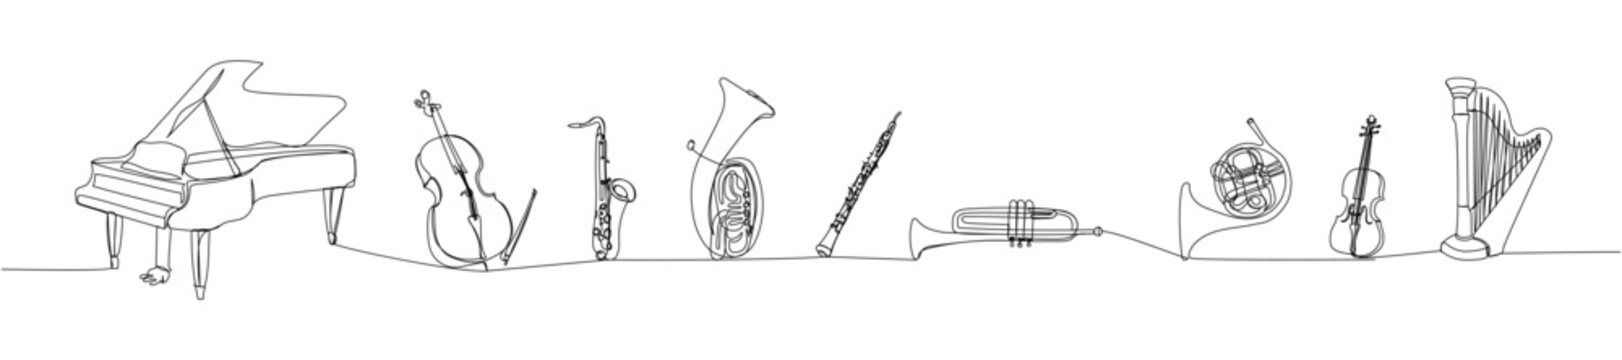 Instruments of the Orchestra set one line art. Continuous line drawing of grand piano, tuba, trumpet, french horn, violin, cello, harp